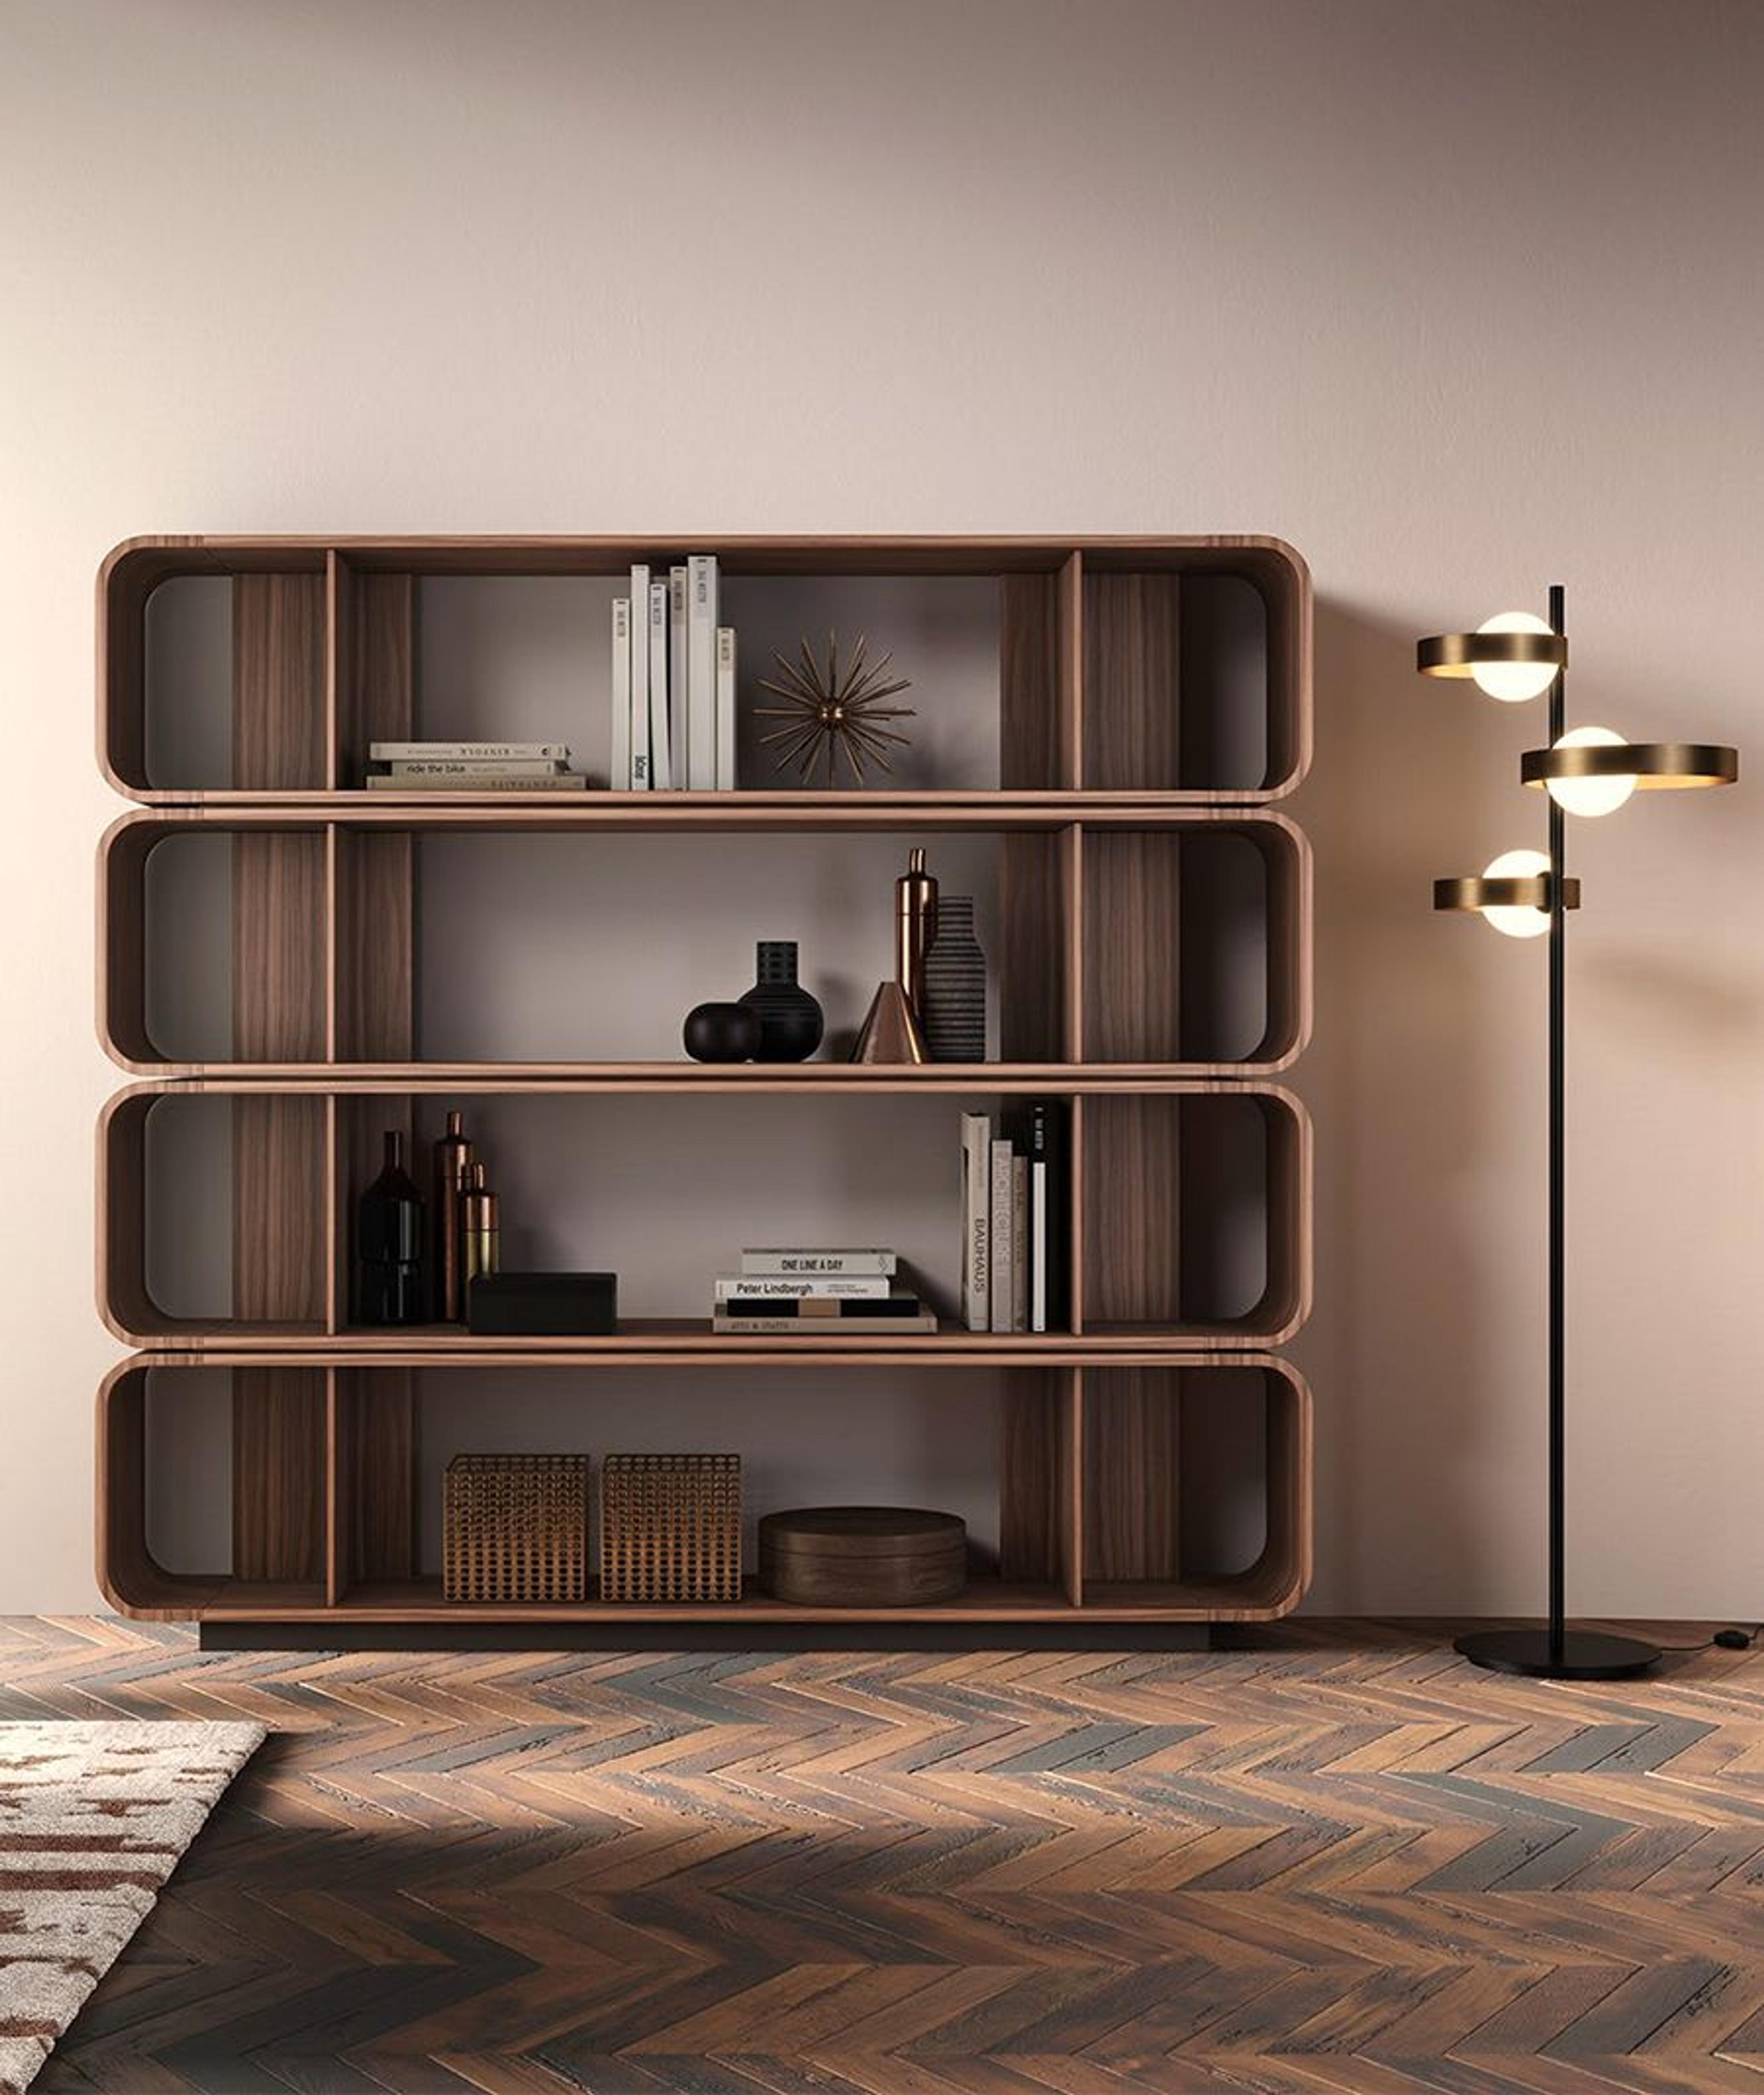 Barba Design's Round Up Bookcase, handcrafted of Canaletto walnut; a sleek, contemporary design by Manuela Pelizzon